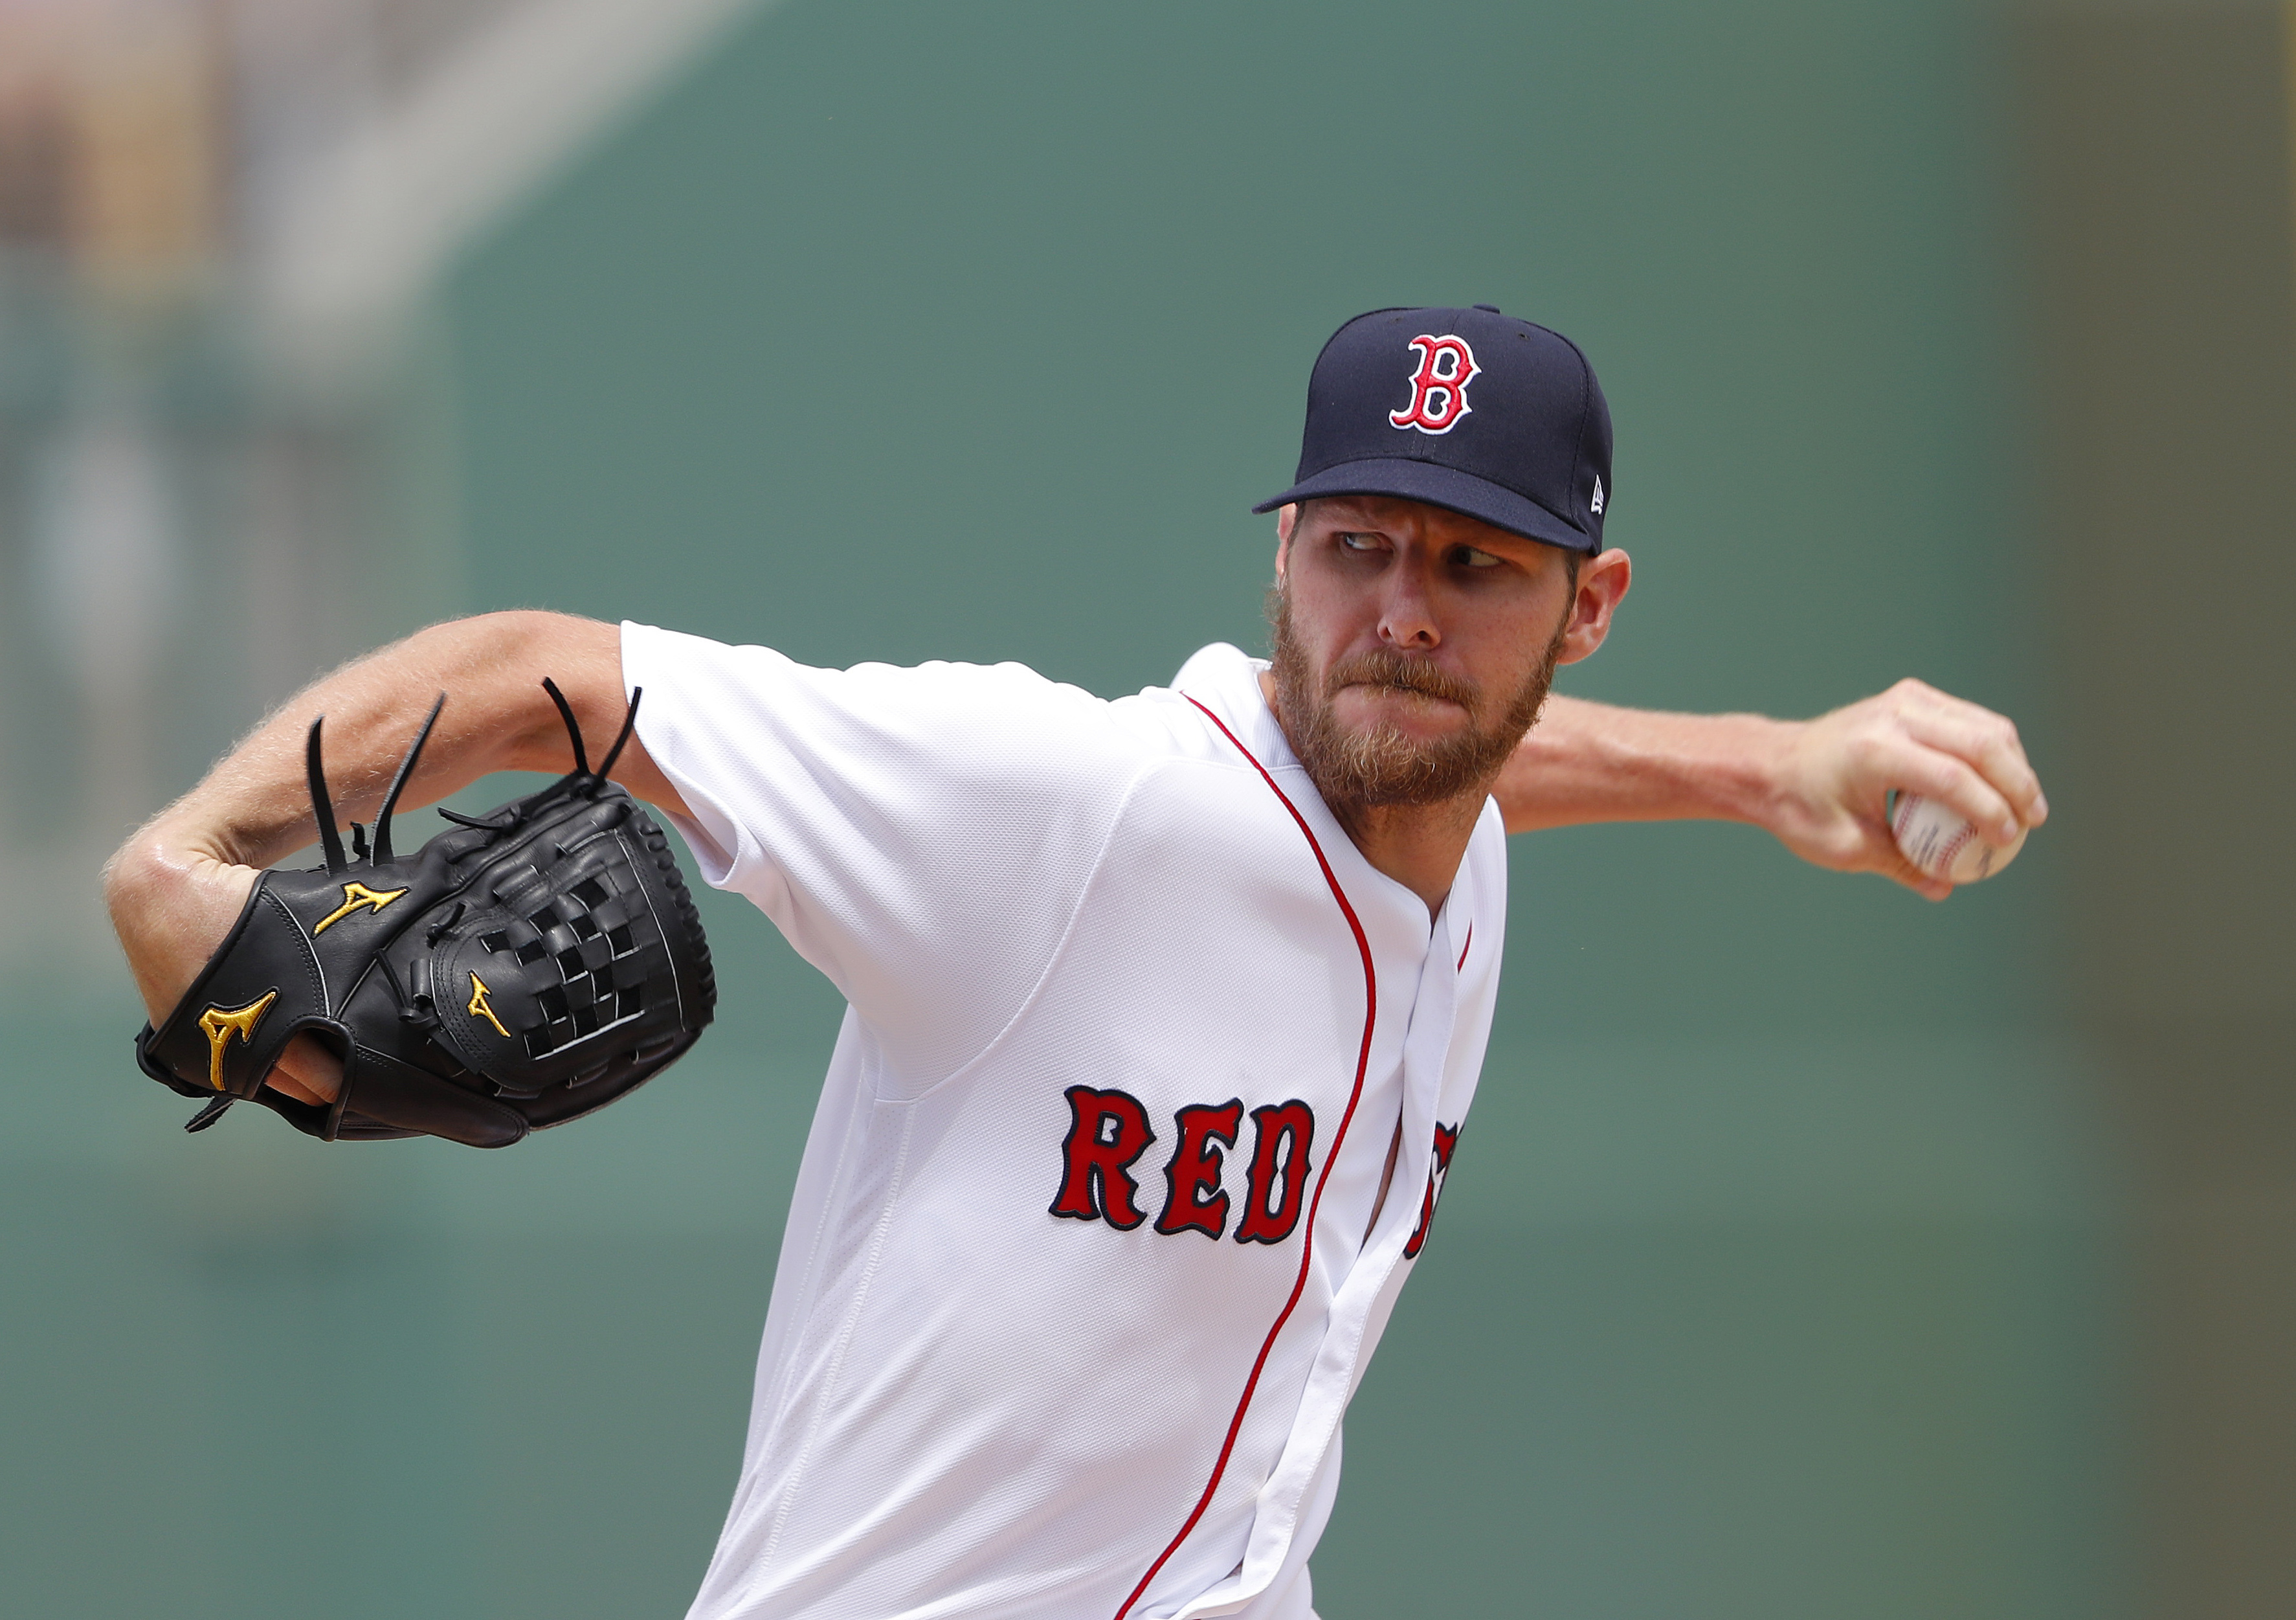 Sale, Red Sox agree to deal adding $145 million to contract